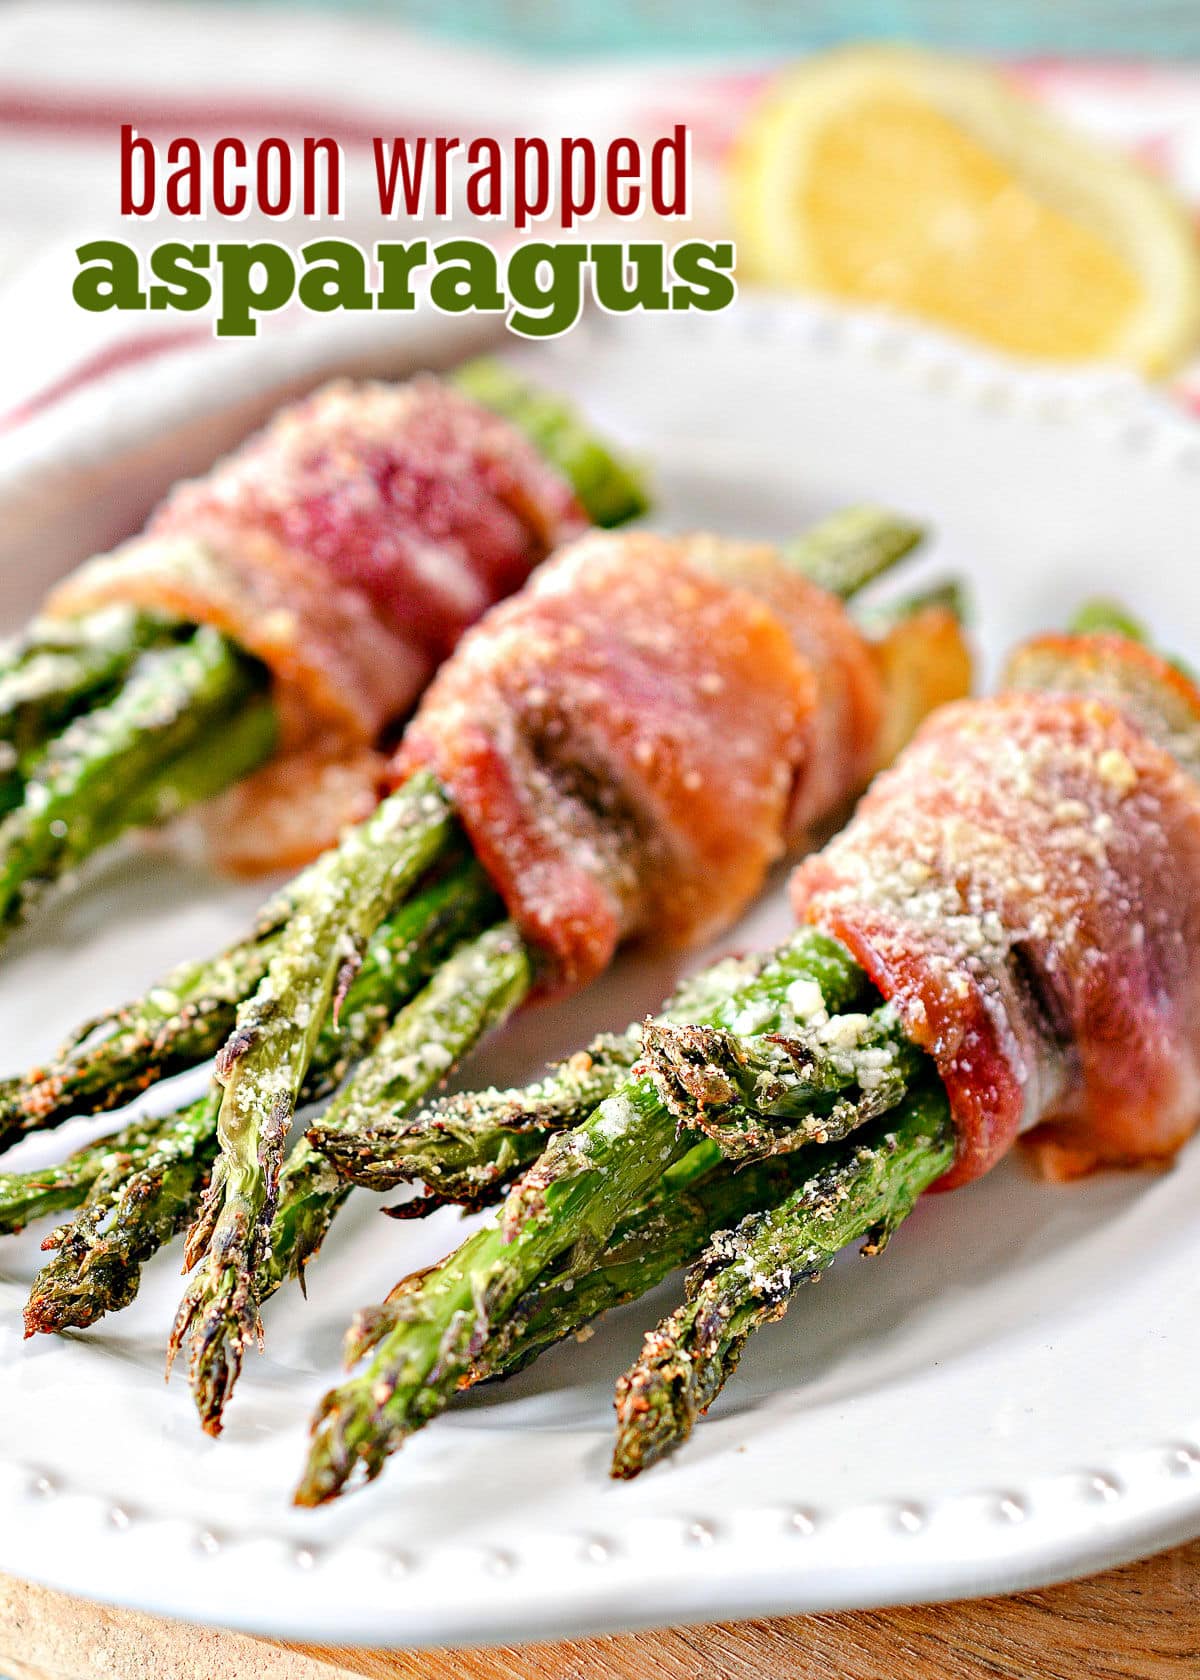 bacon wrapped asparagus recipe with garlic and parmesan